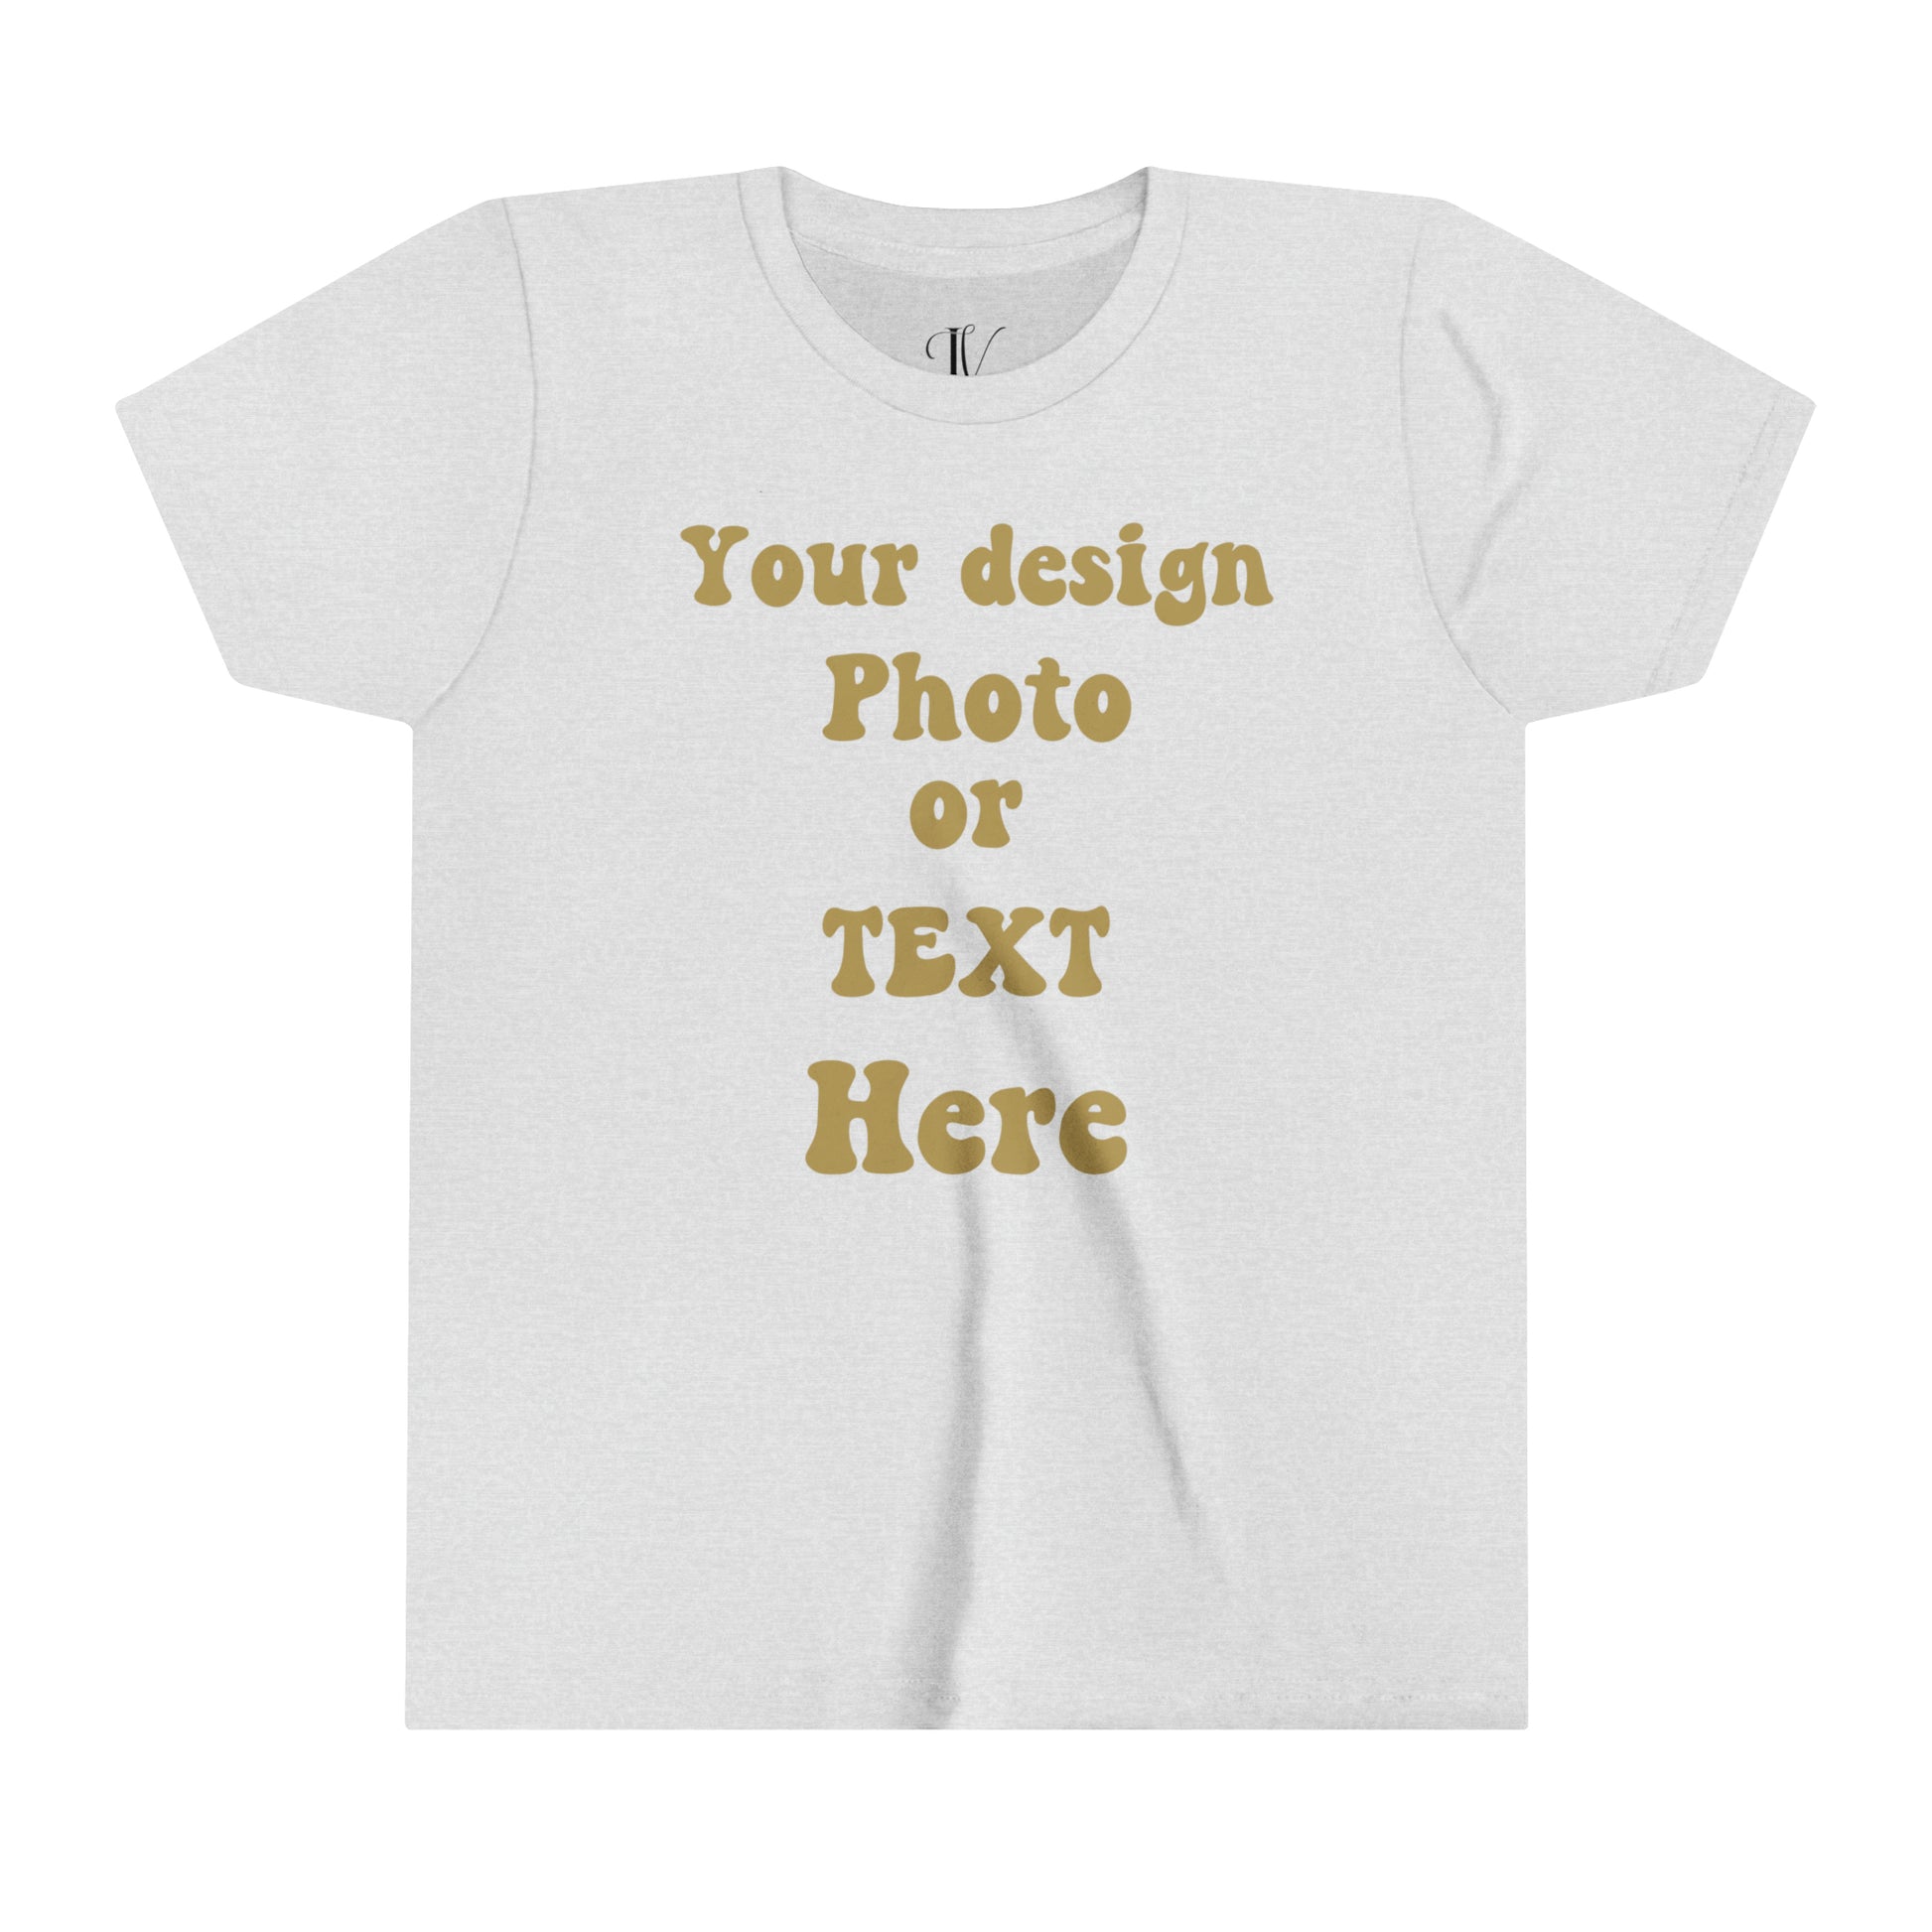 Youth Short Sleeve Tee - Personalized with Your Photo, Text, and Design Kids clothes Ash S 